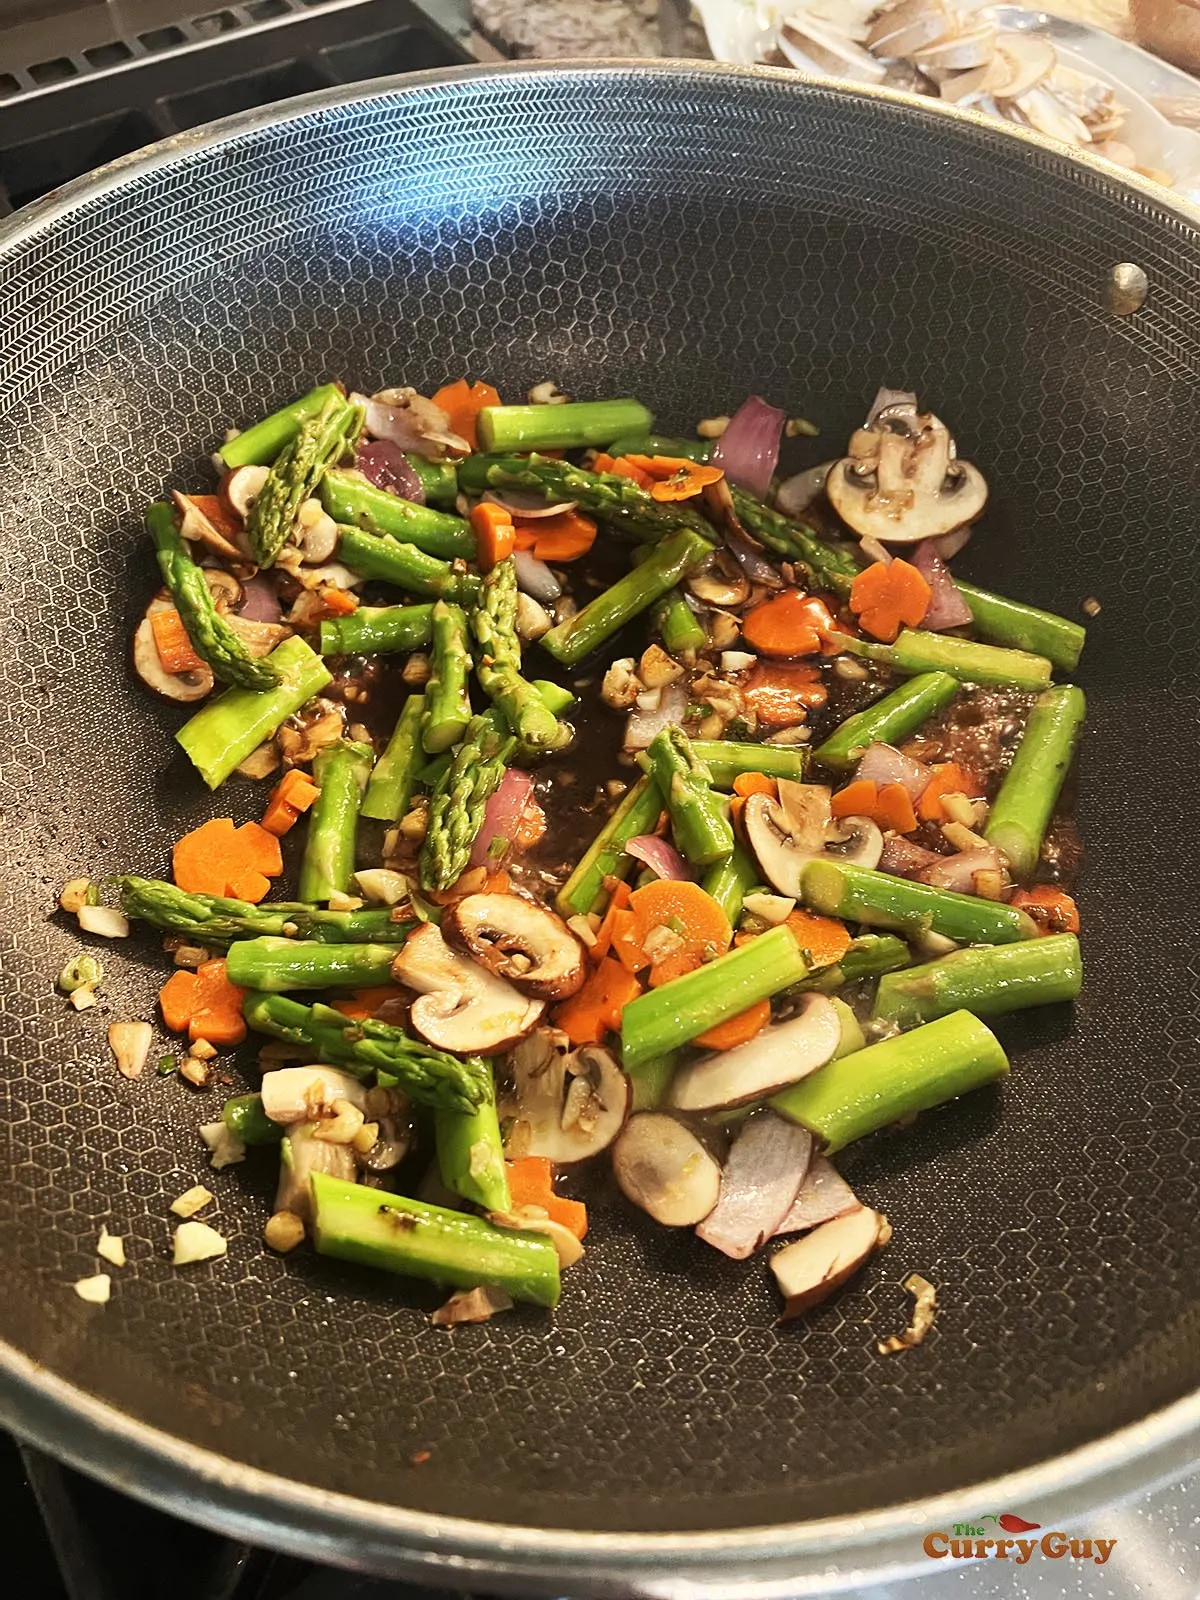 Returning the blanched carrots and asparagus to the wok.